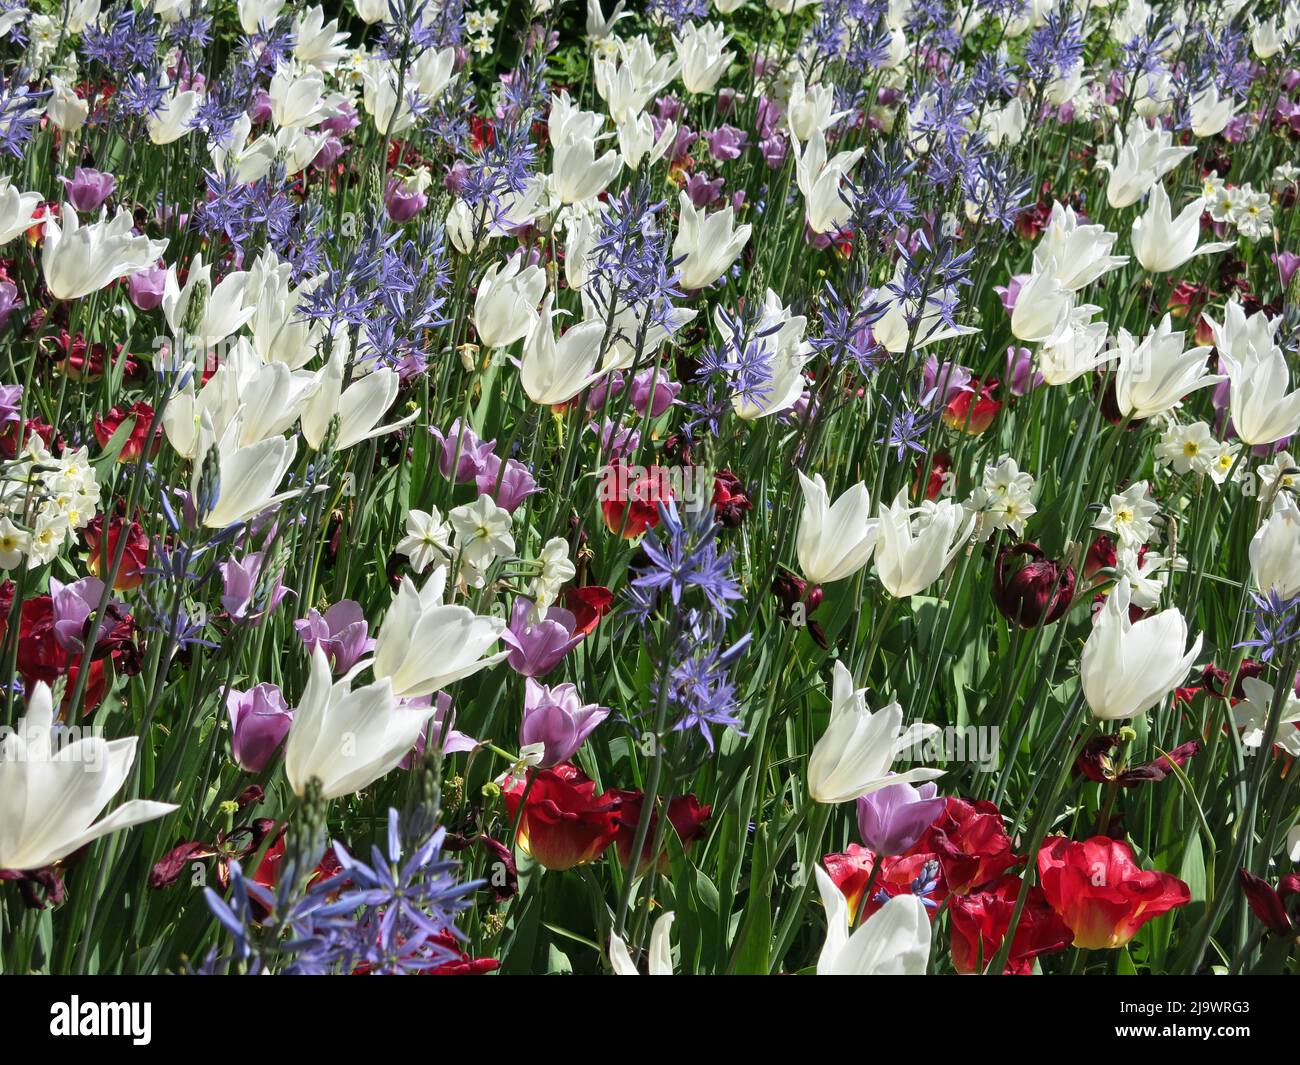 Tulip Fever: swathes of tulips as far as the eye can see, the Netherlands spring bulb festival at the gardens of Keukenhof 2022 Stock Photo